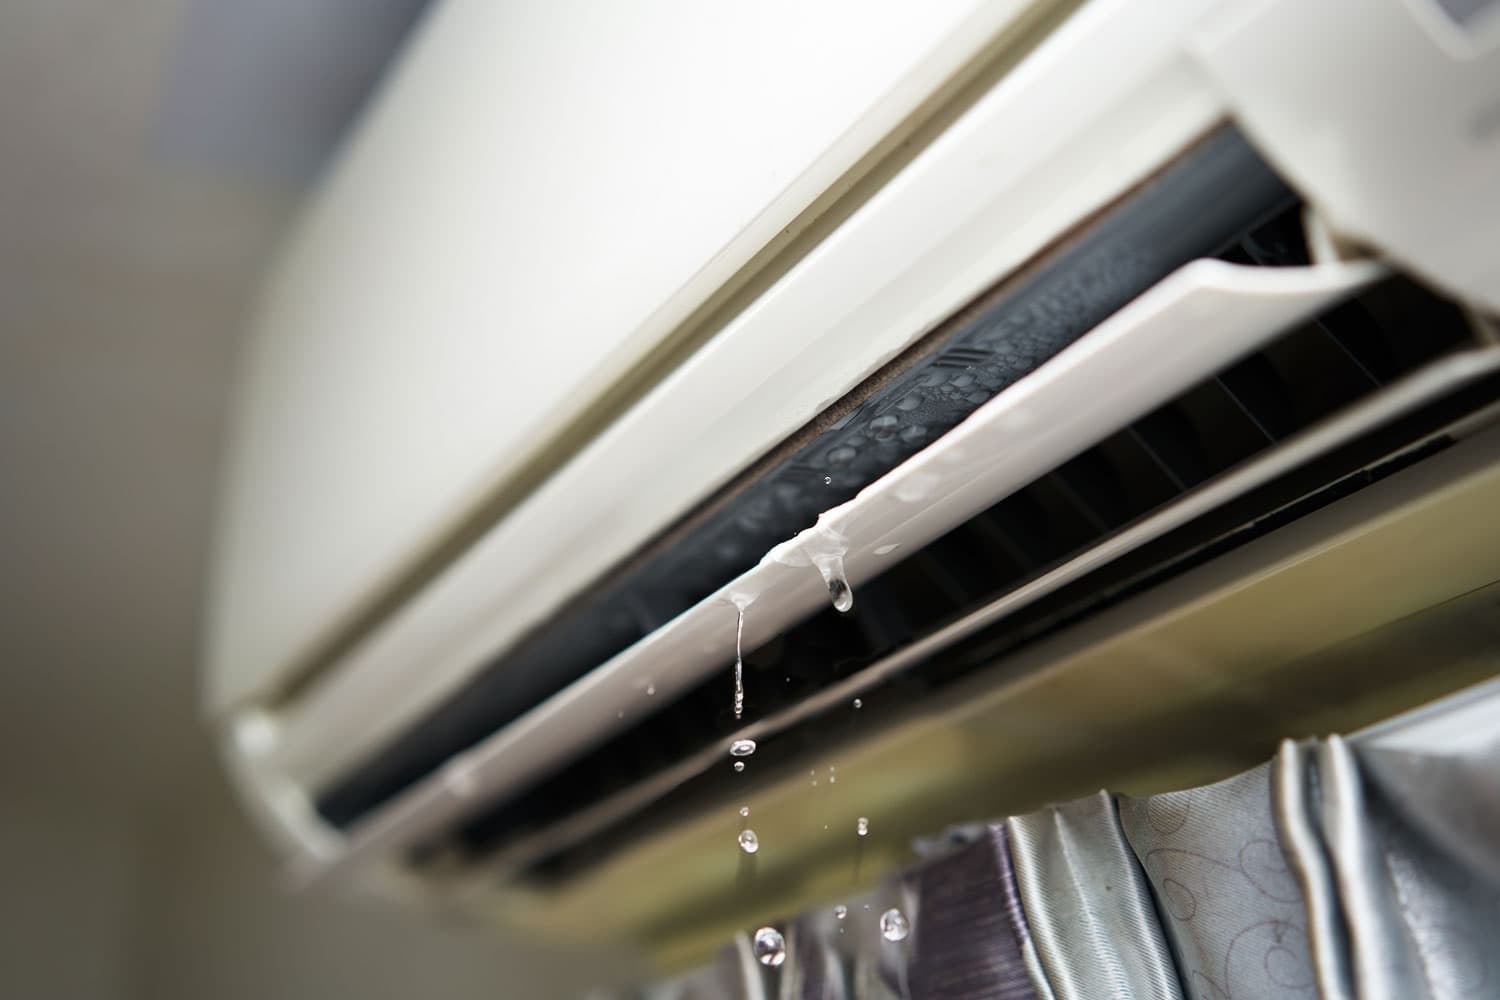 Water dripping down from the mini split AC